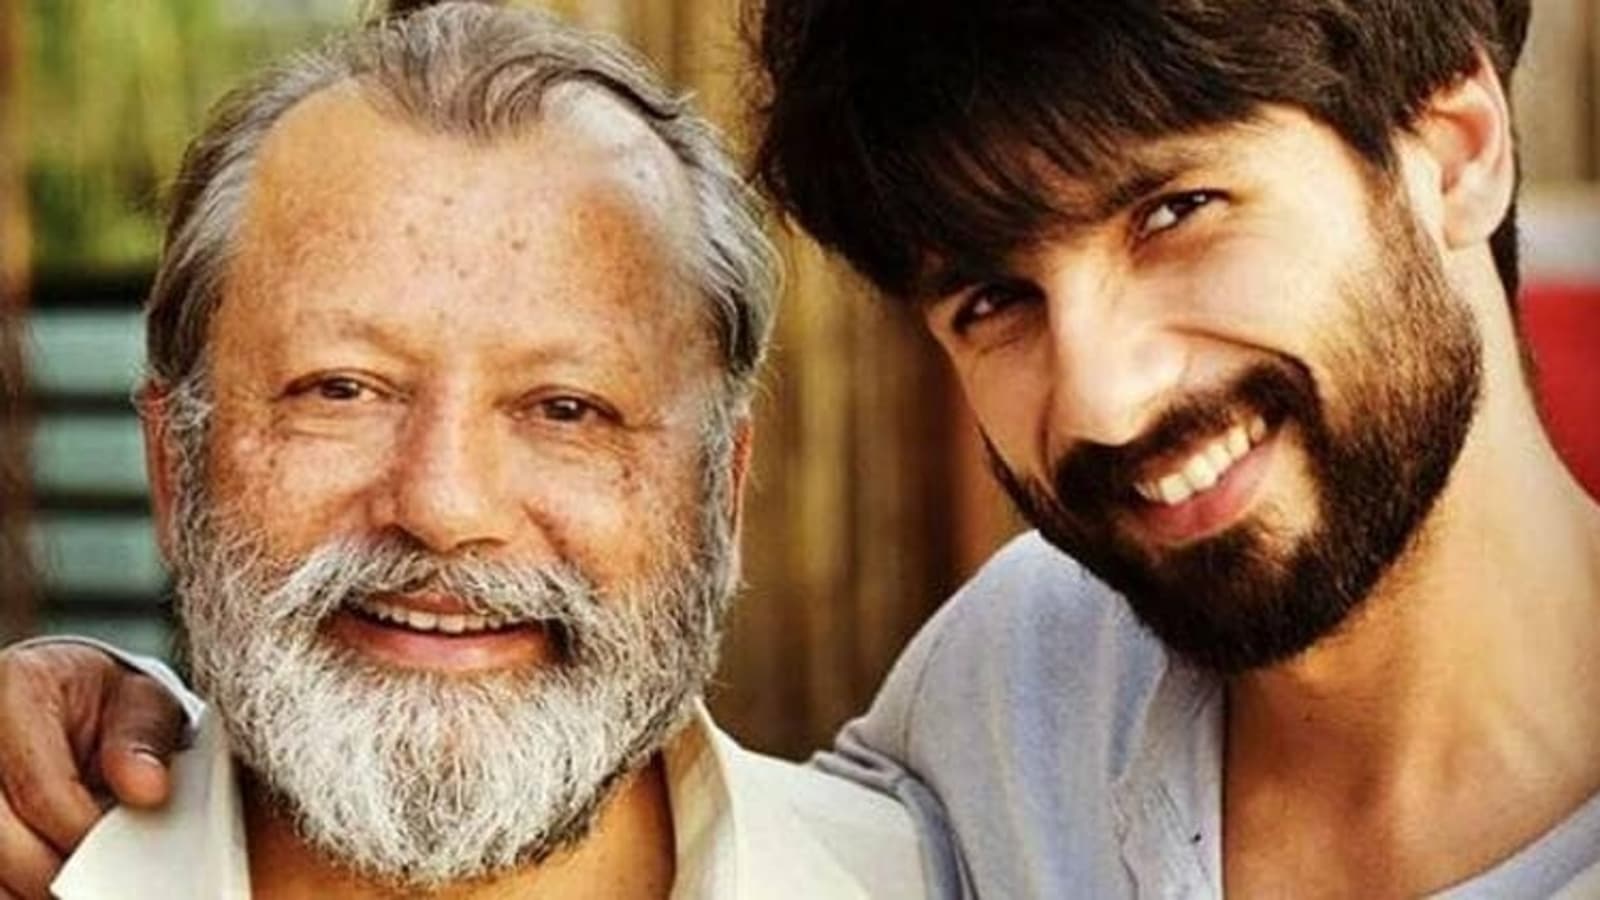 Shahid Kapoor feared he wouldn’t become an actor despite being Pankaj Kapur’s son: ‘People didn’t know I was his son’